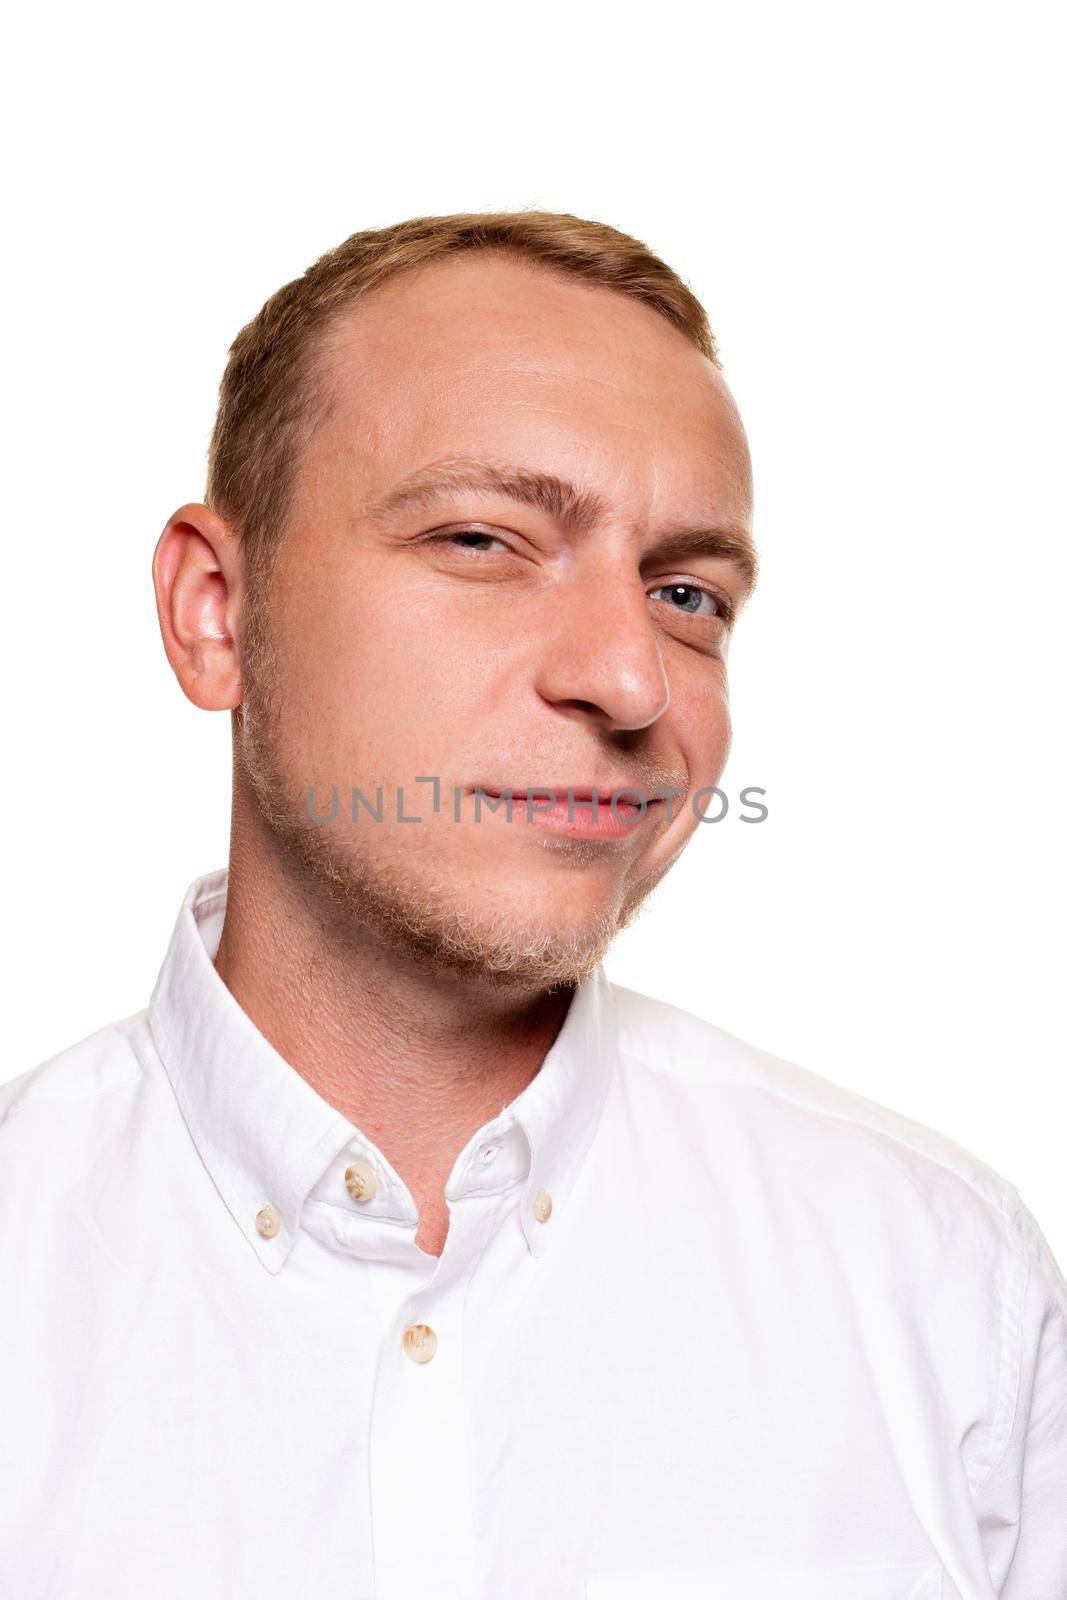 Handsome young blond man in a white shirt is grining, isolated on a white background